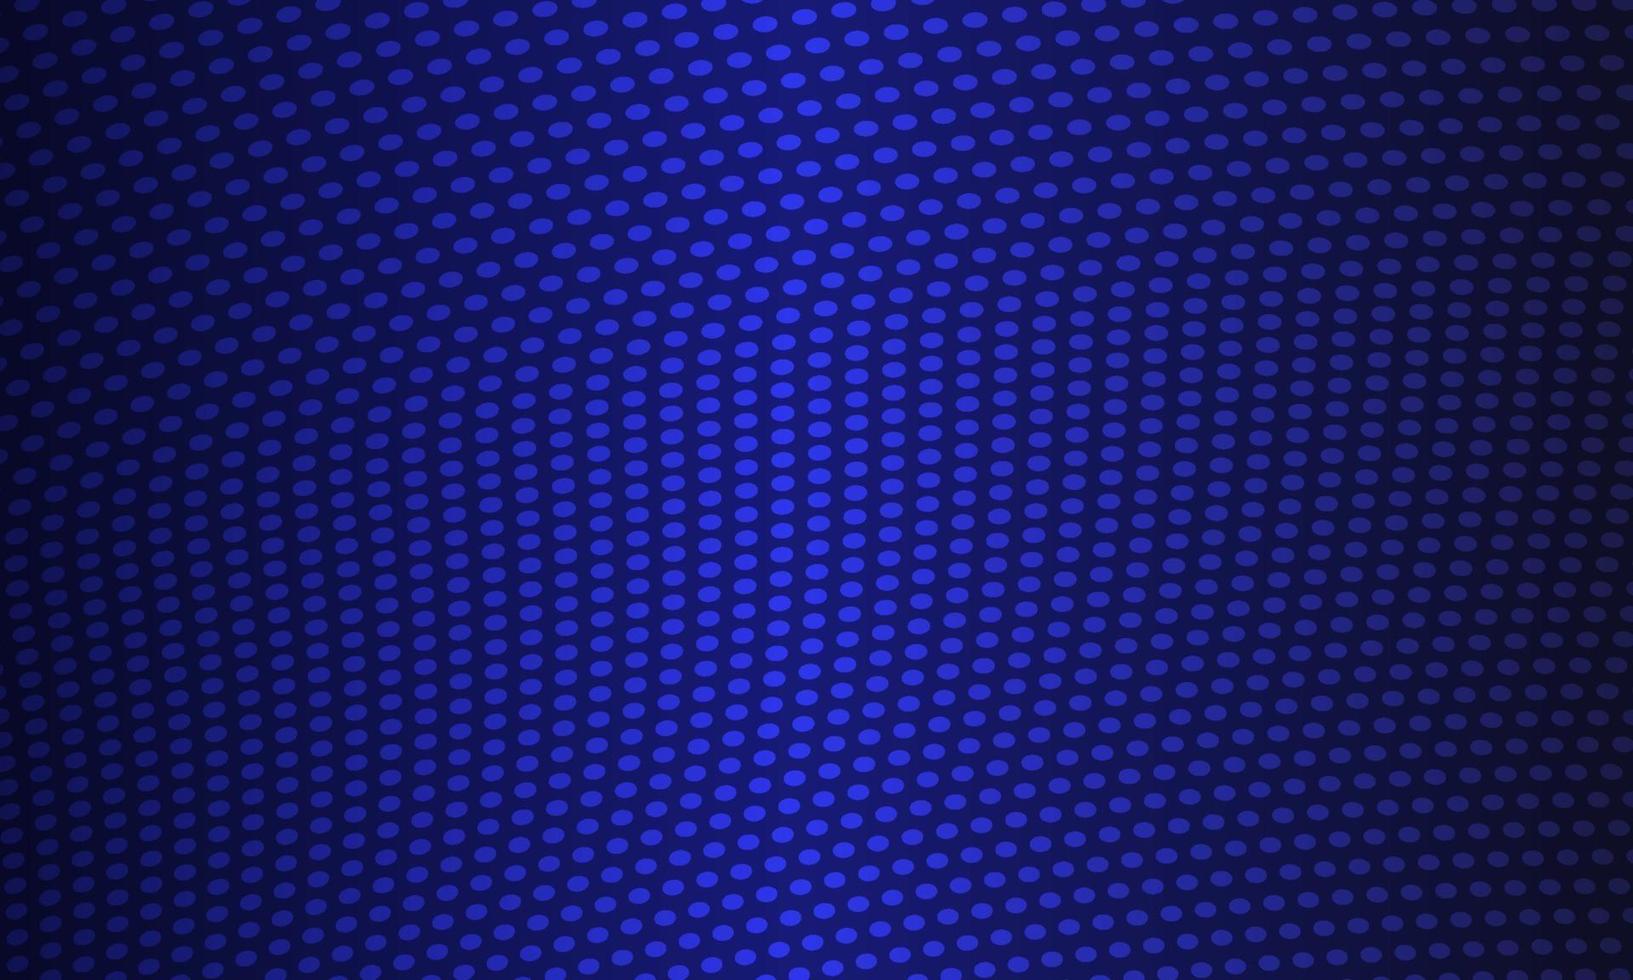 Abstract Dark Blue Wave Dots Background vector